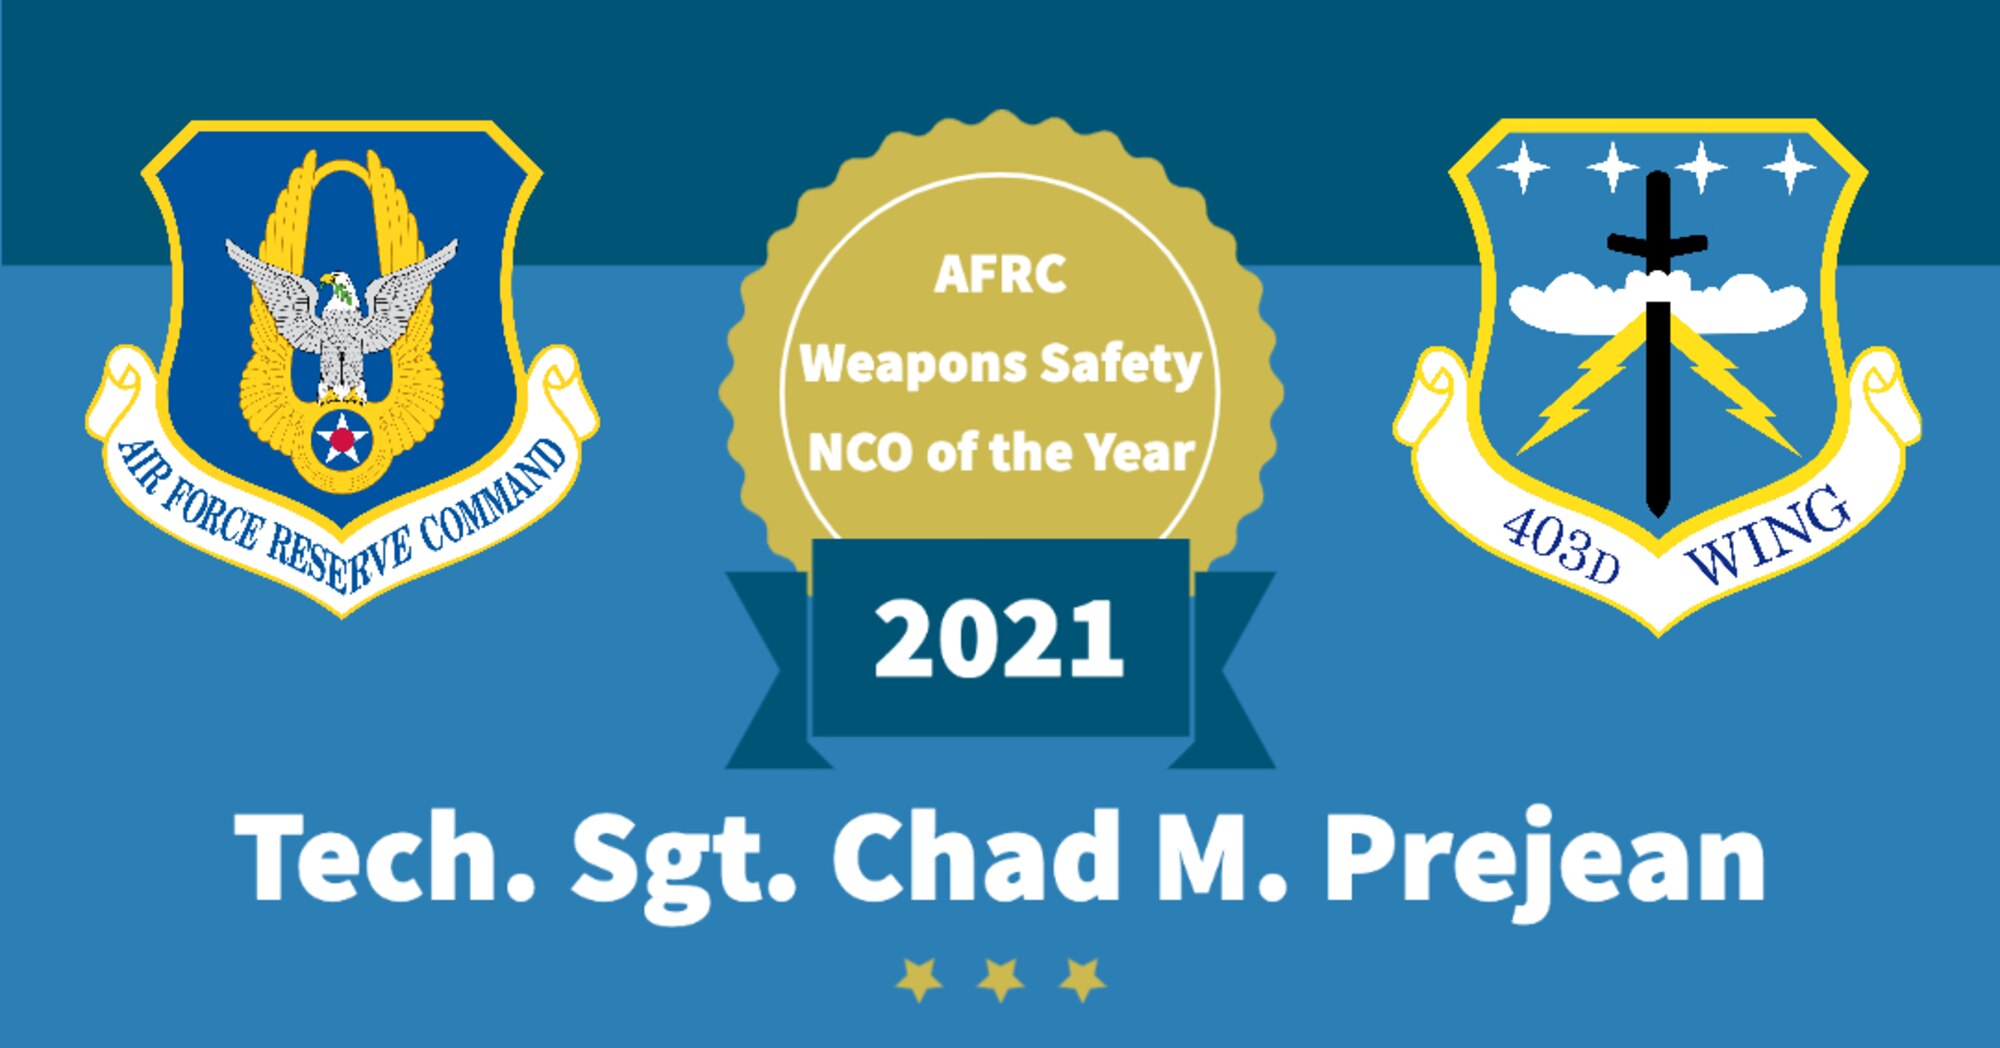 Air Force Reserve Command logo. 403rd Wing logo. Weapons Safety NCO of the Year. 2021. Tech. Sgt. Chad M. Prejean.